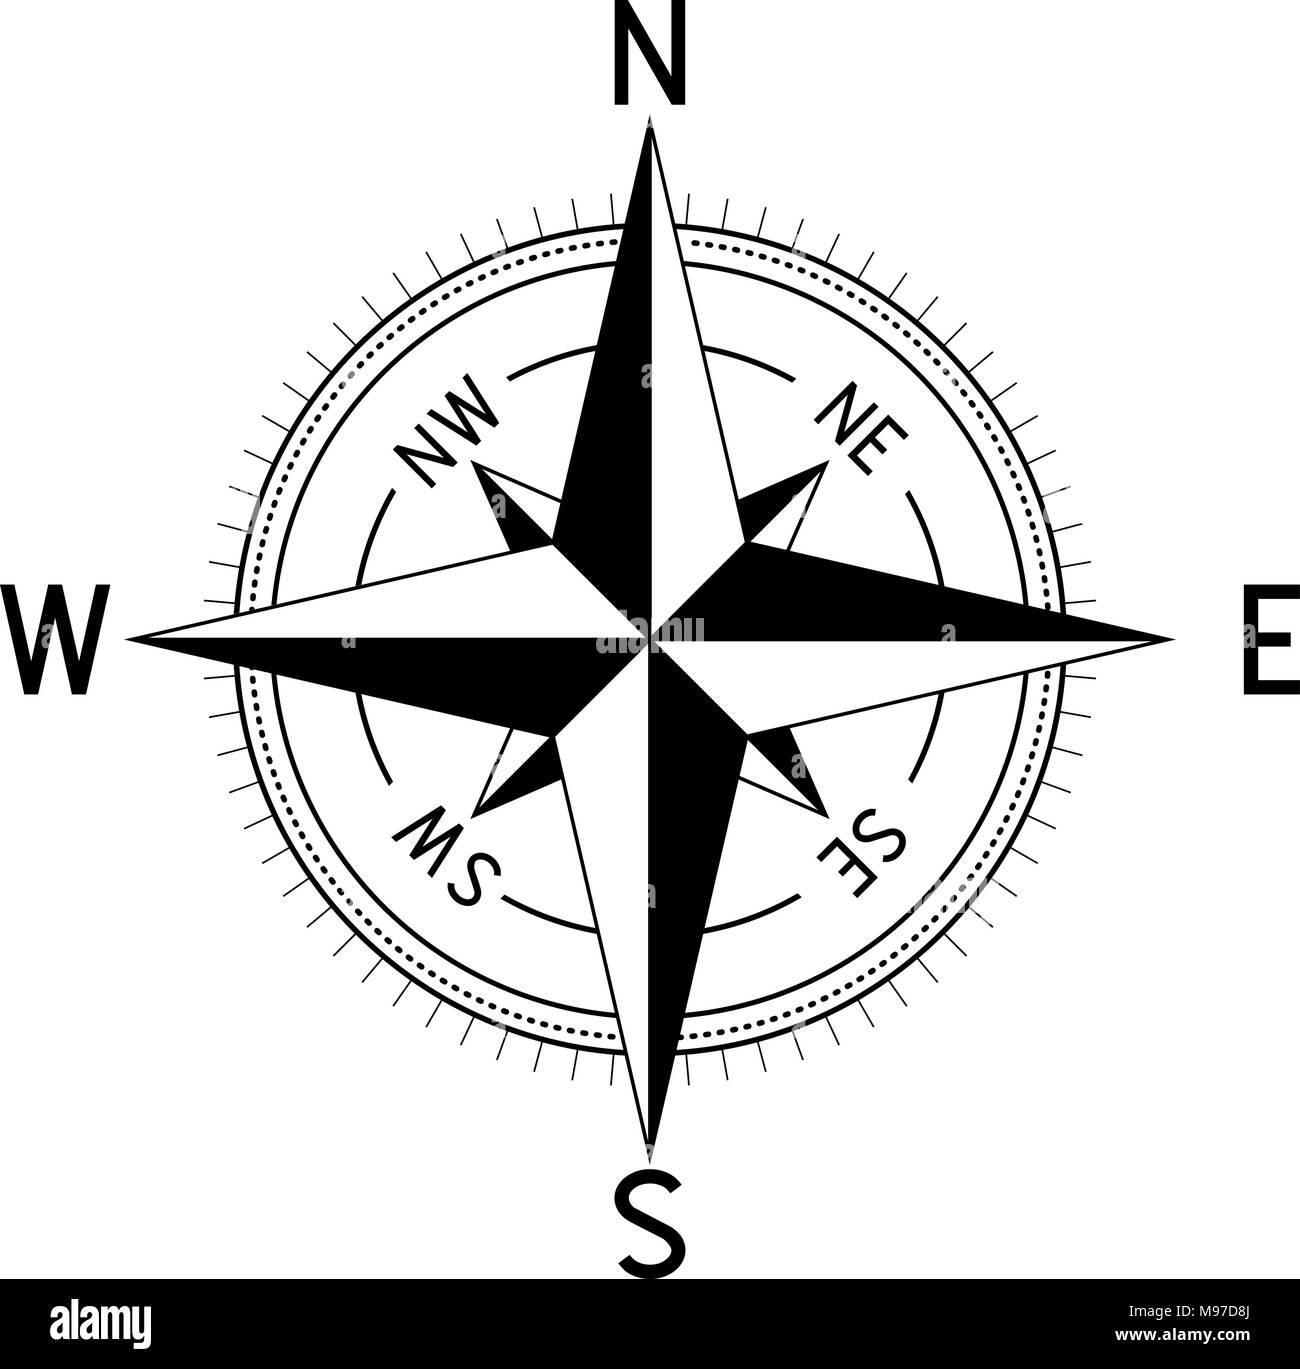 Opening Compass for Black and White